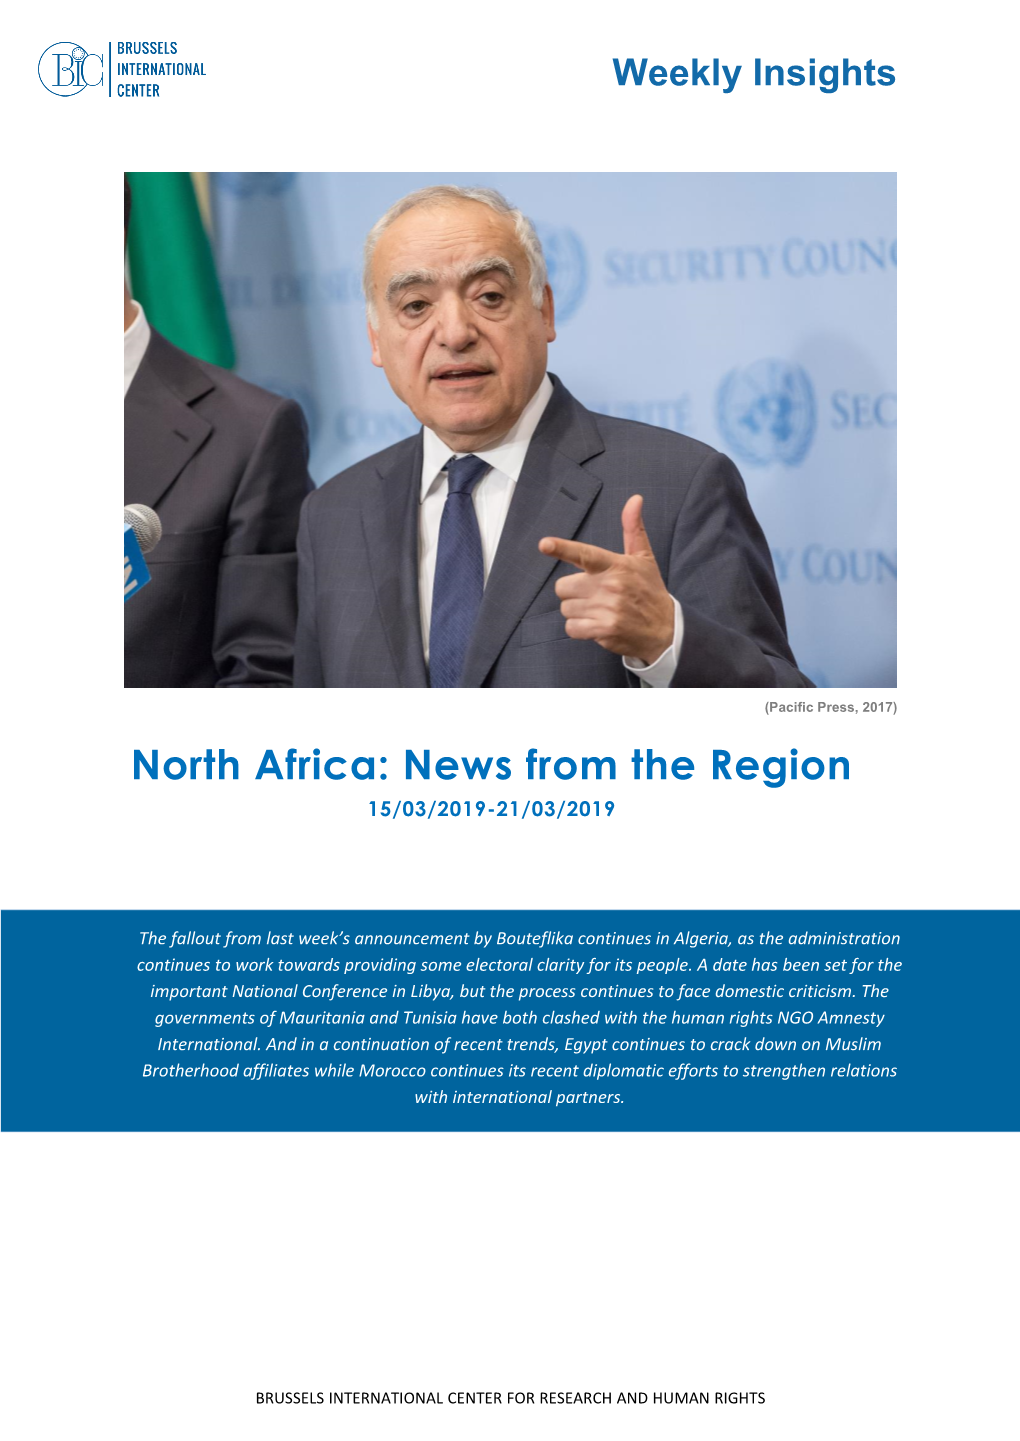 North Africa: News from the Region 15/03/2019-21/03/2019